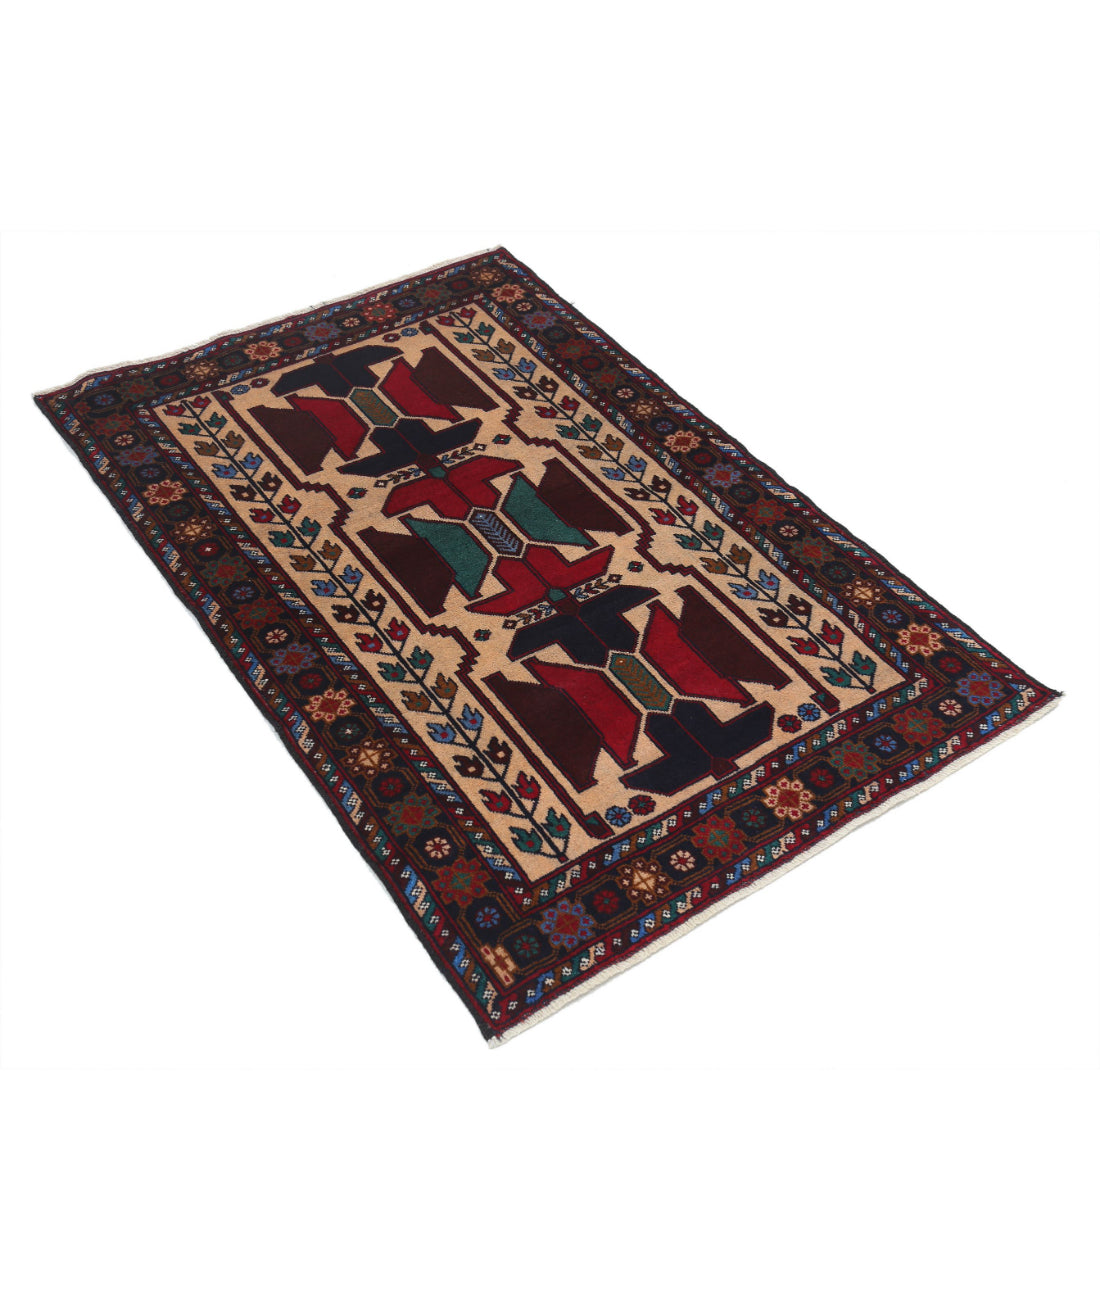 Baluch 2'11'' X 4'5'' Hand-Knotted Wool Rug 2'11'' x 4'5'' (88 X 133) / Red / N/A